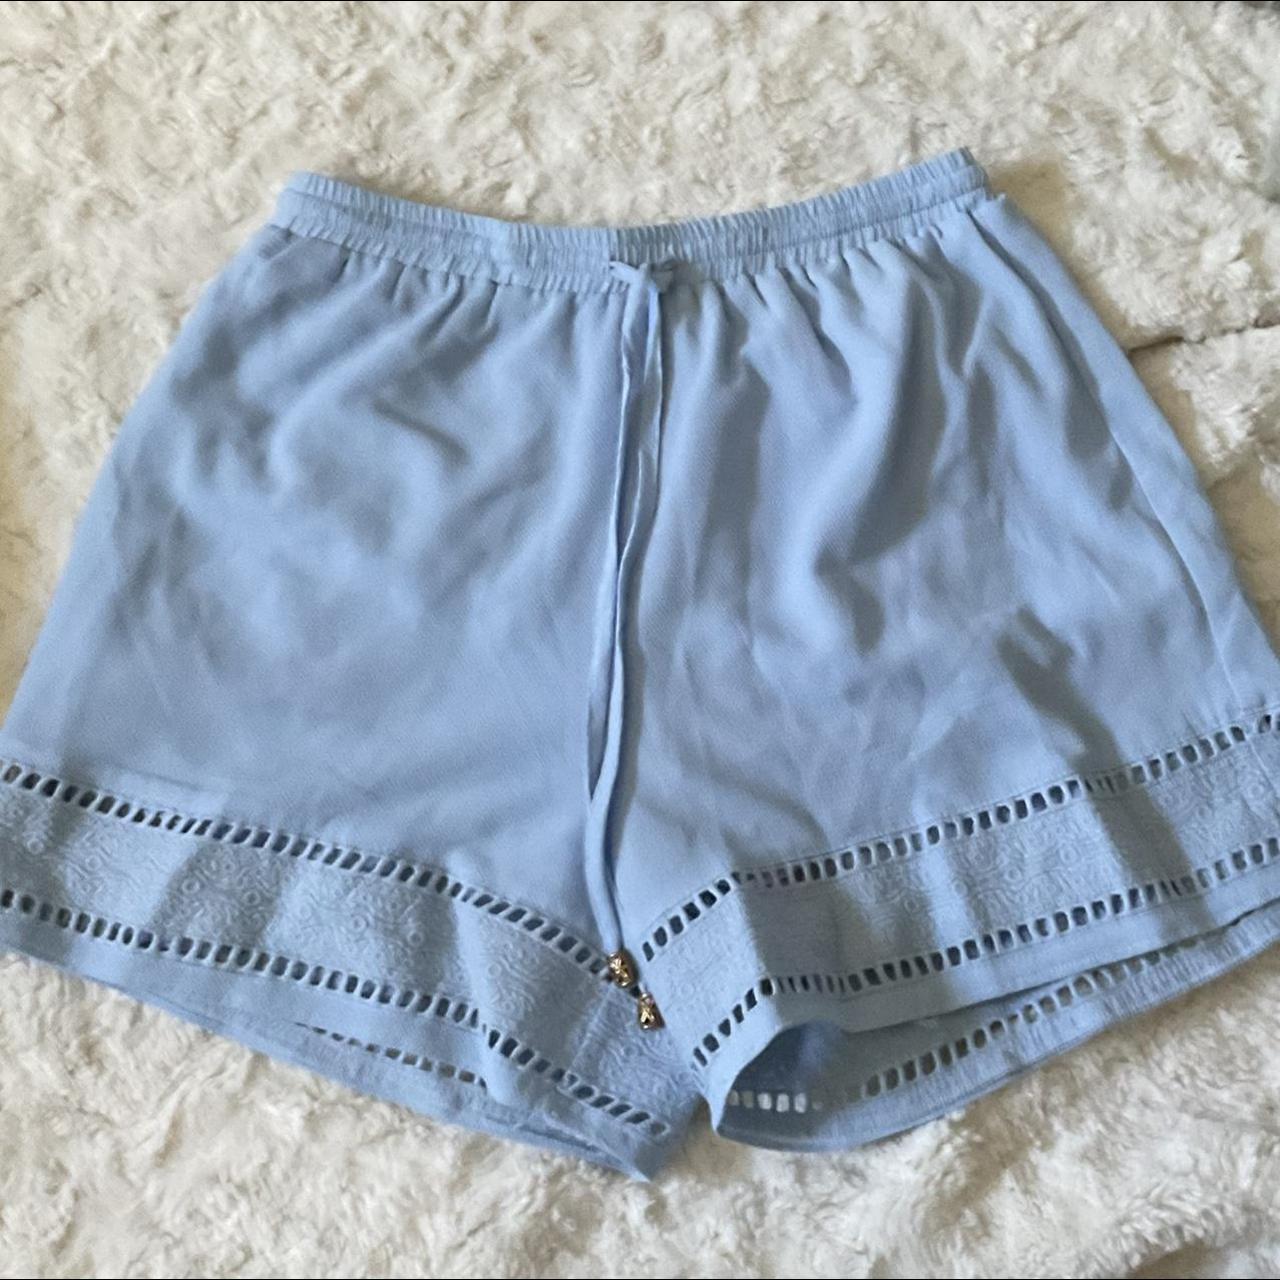 blue flowy shorts great for any occasion - Depop